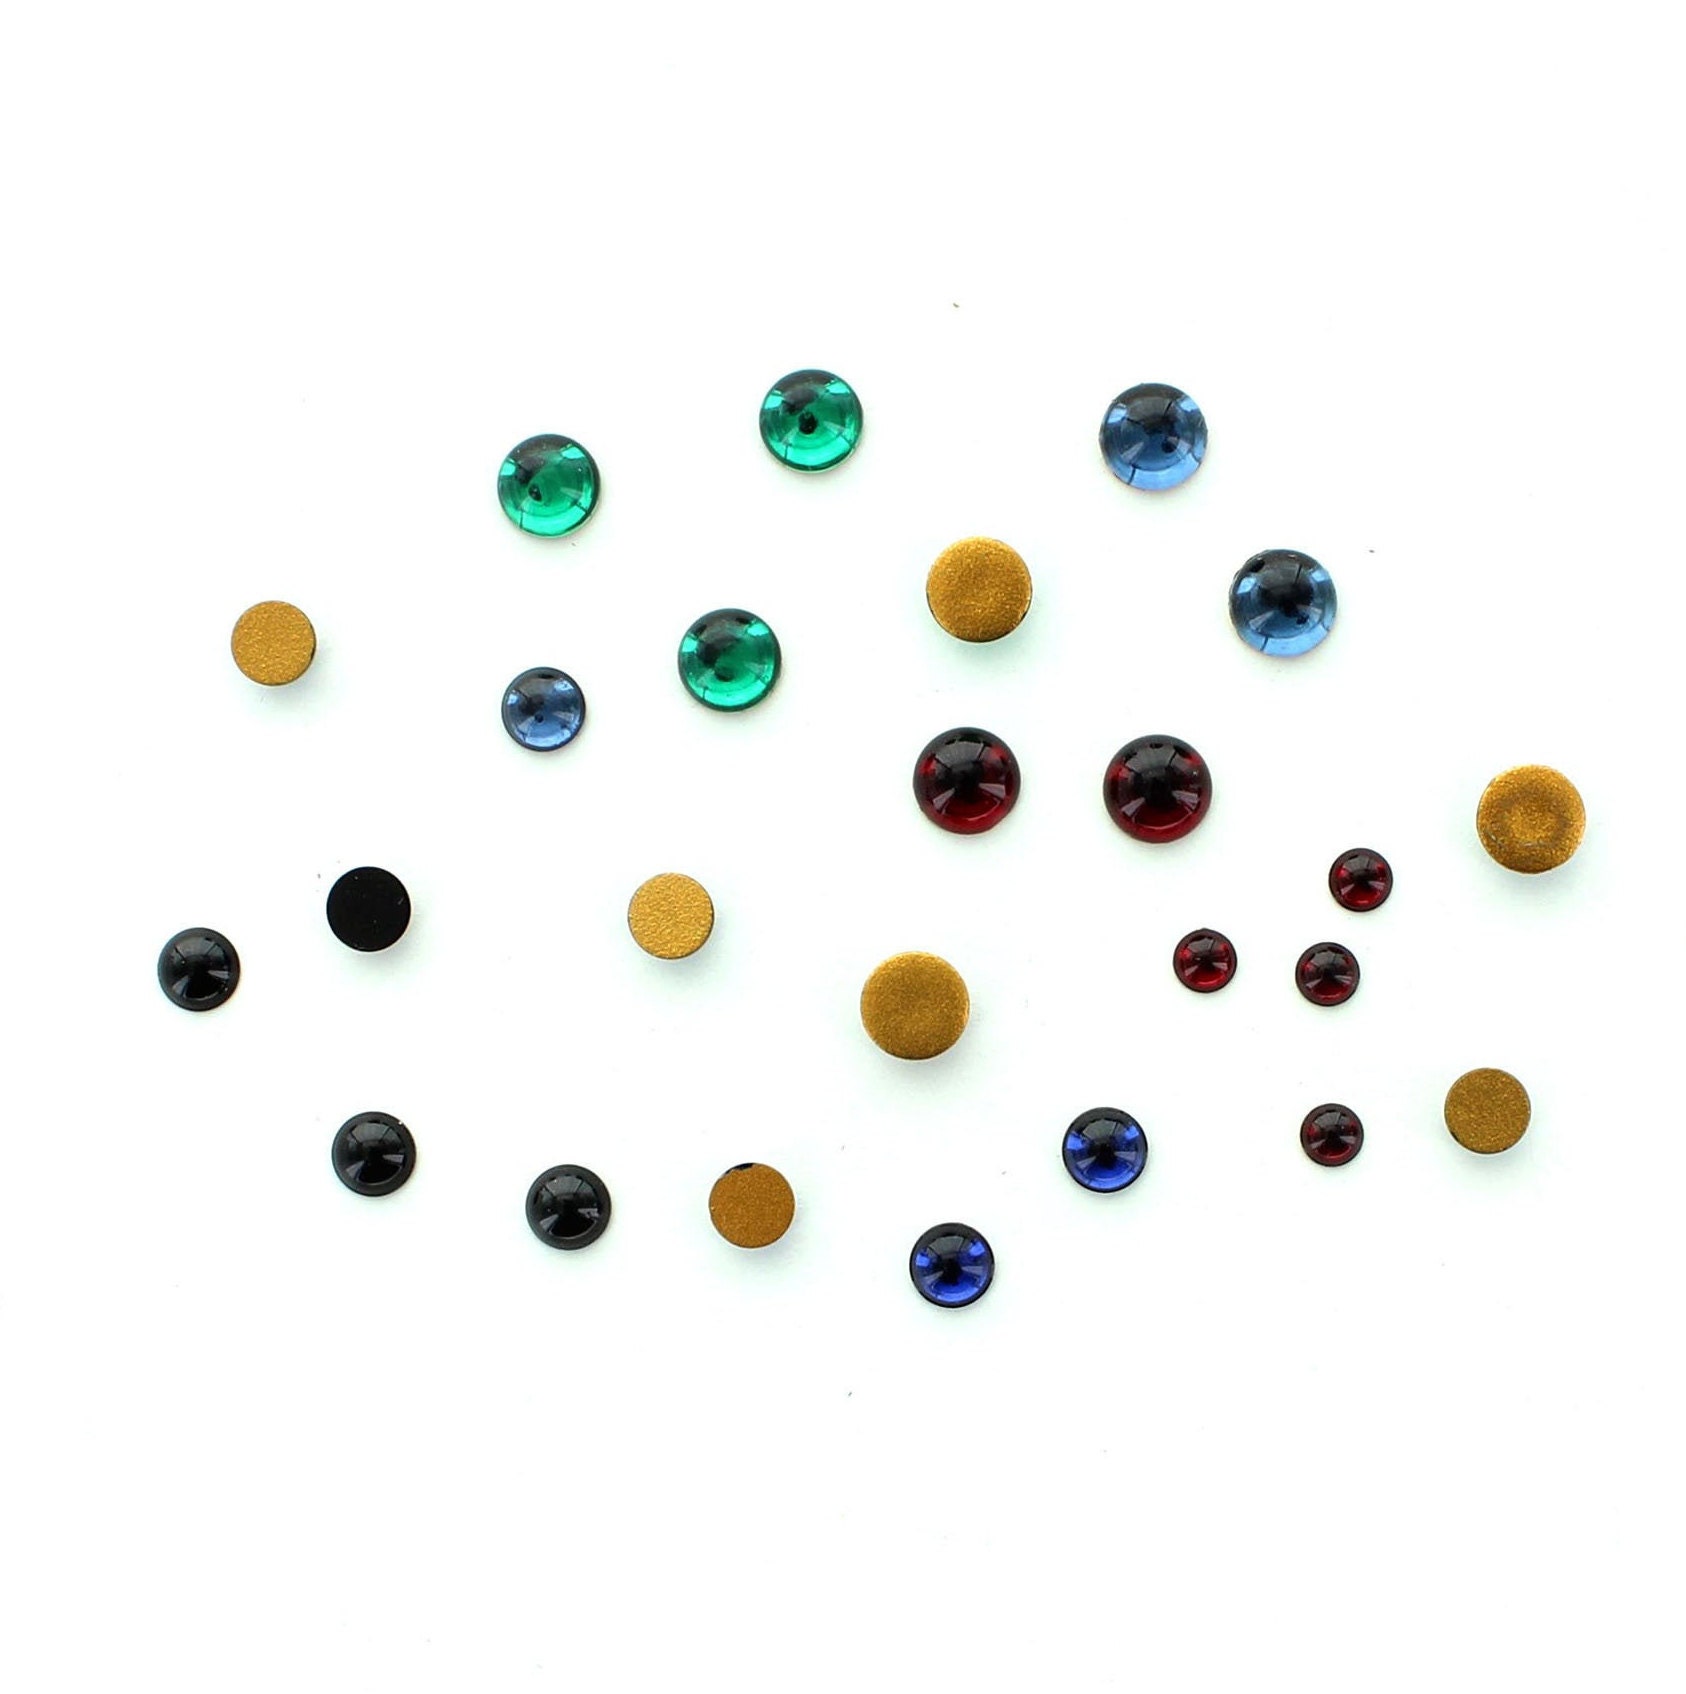 Swarovski Stones Article 4120. Size 18x13mm and 14x10. Price is